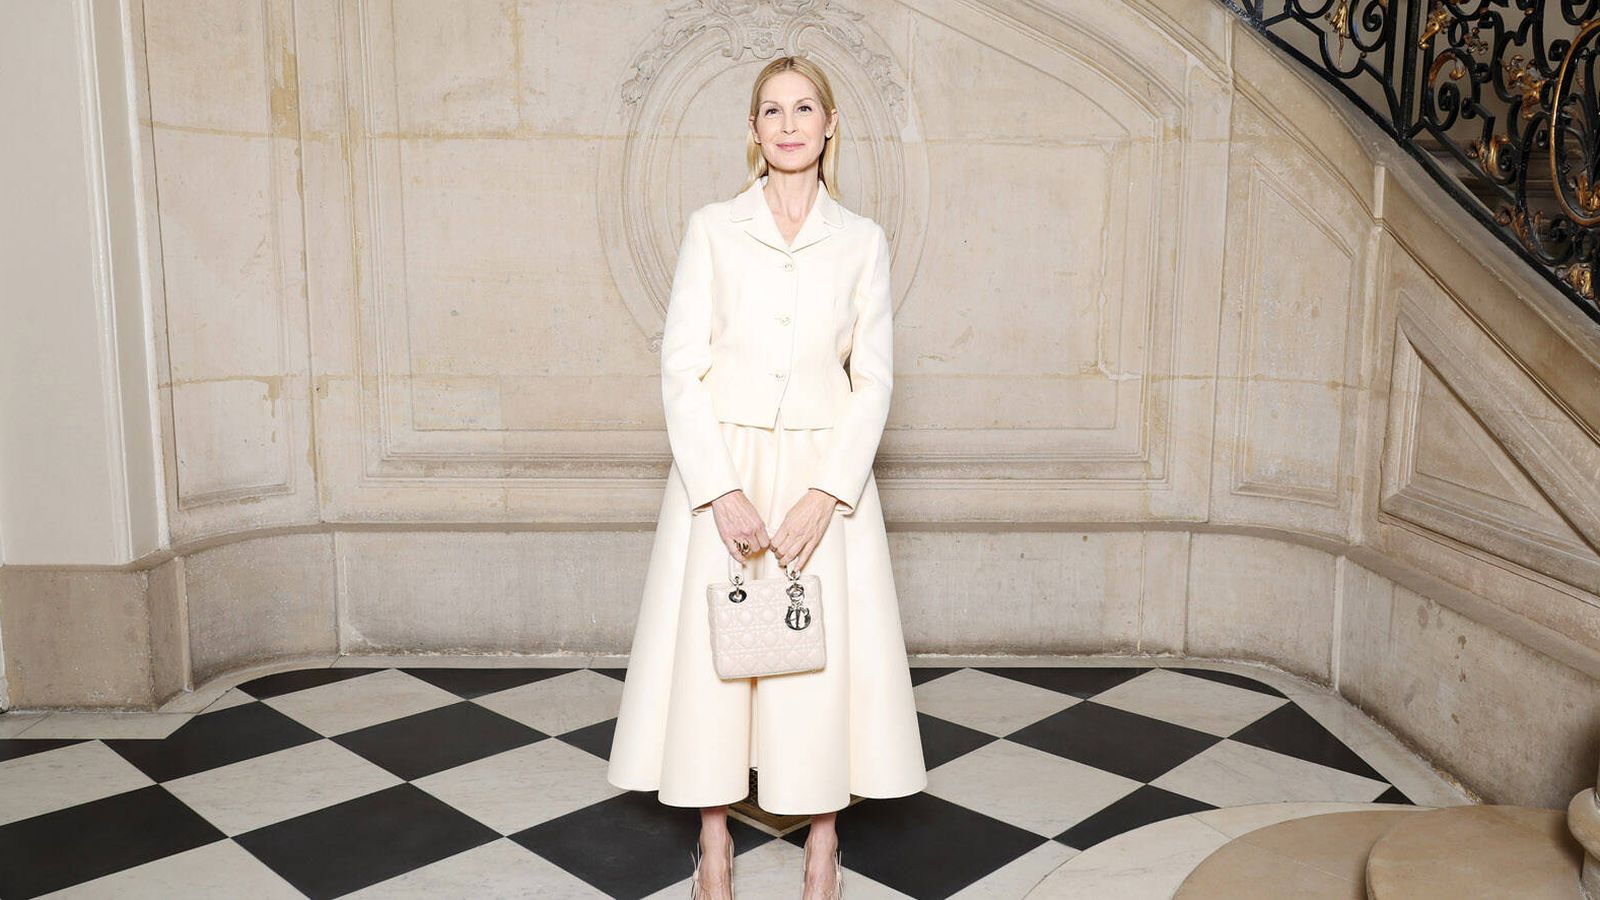 Kelly Rutherford. (Getty Images)